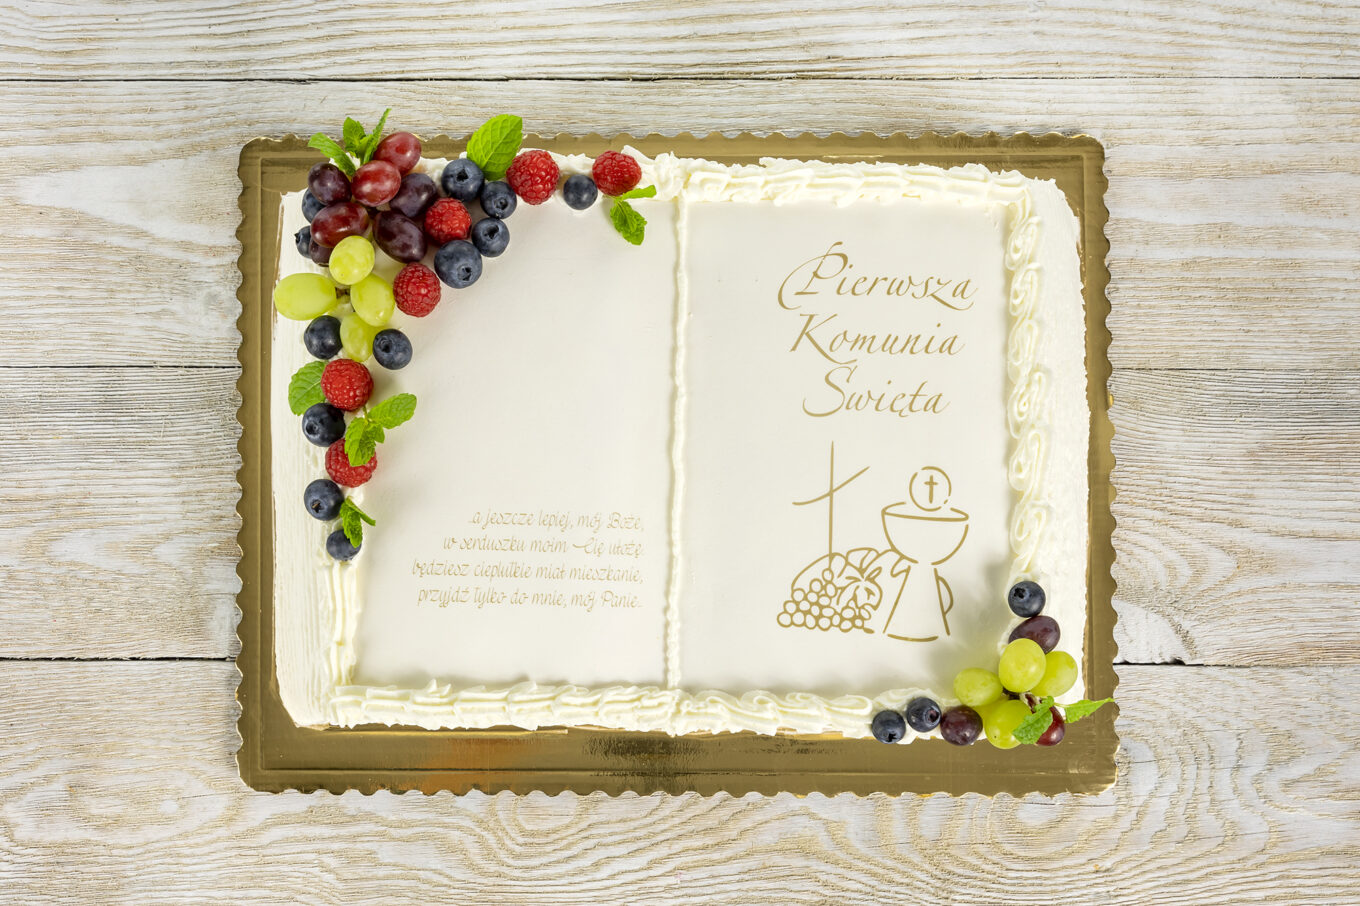 communion cake book with fruit Cukiernia Jacek Placek is synonymous with the taste of homemade cakes made of natural products.